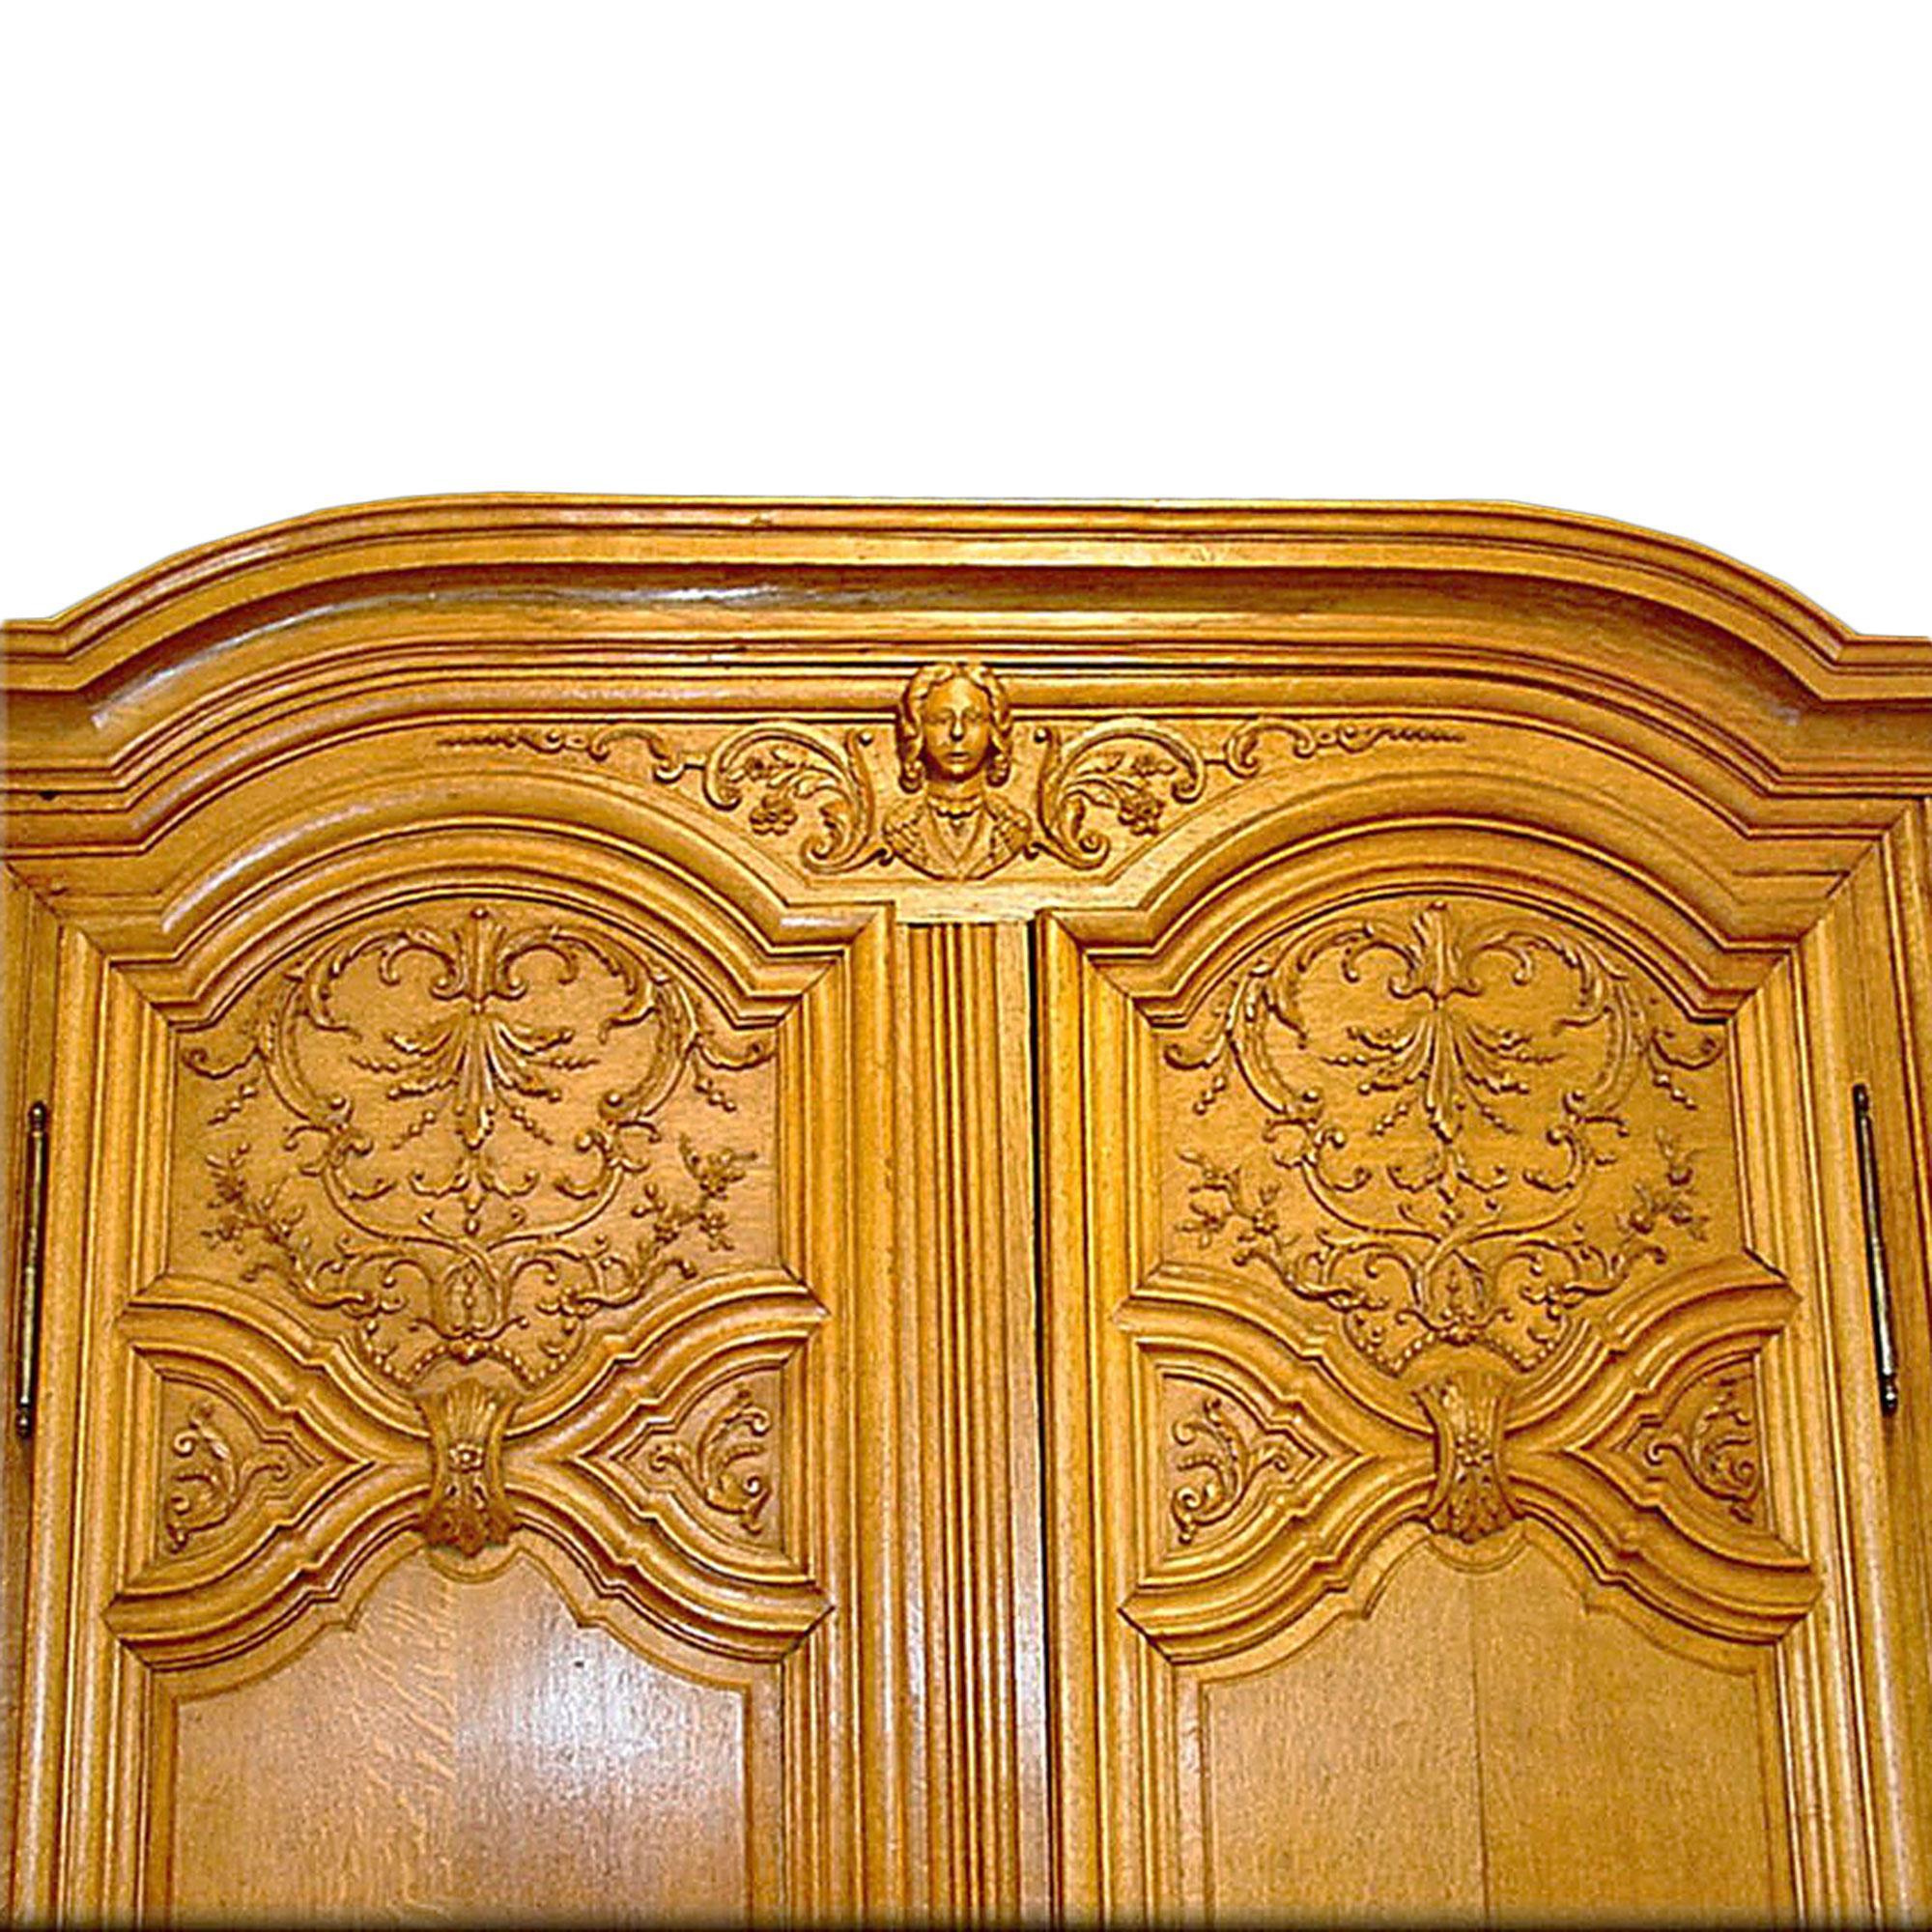 An exceptional French 18th century Louis XIV period two-door Oak armoire with extremely fine carvings of flowers, garlands, and at the top, carvings of a face. All original hardware.